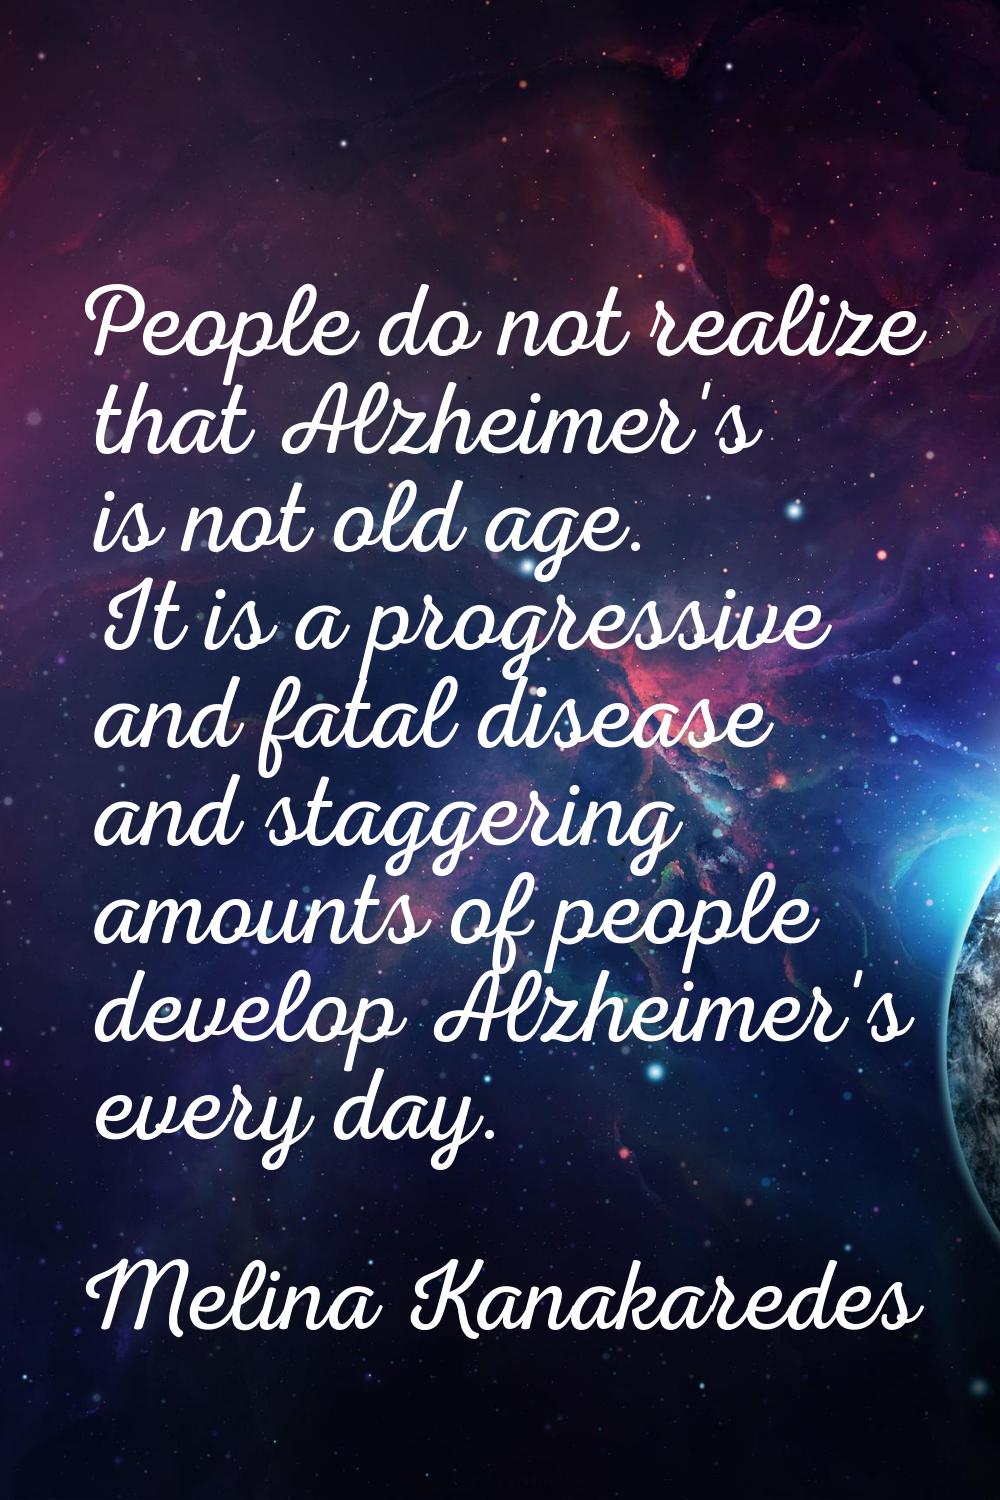 People do not realize that Alzheimer's is not old age. It is a progressive and fatal disease and st